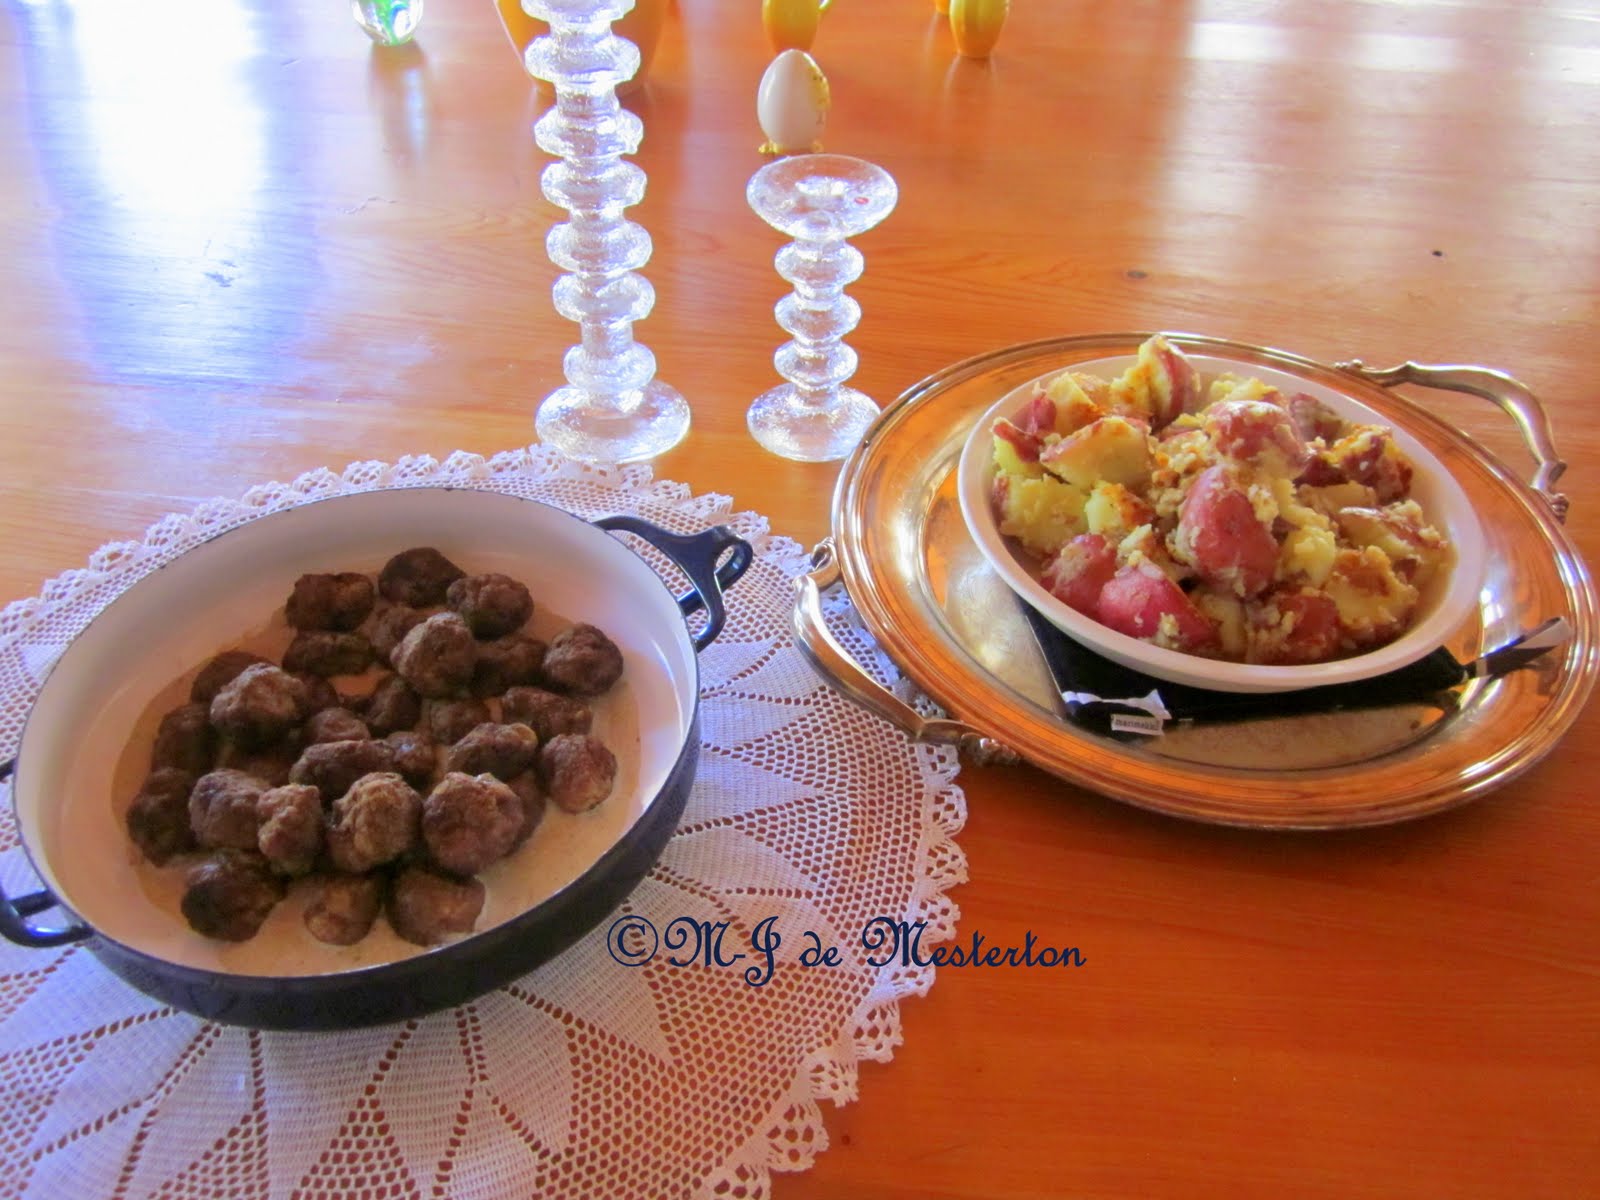 Serve Swedish meatballs with new potatoes and perhaps a little ...